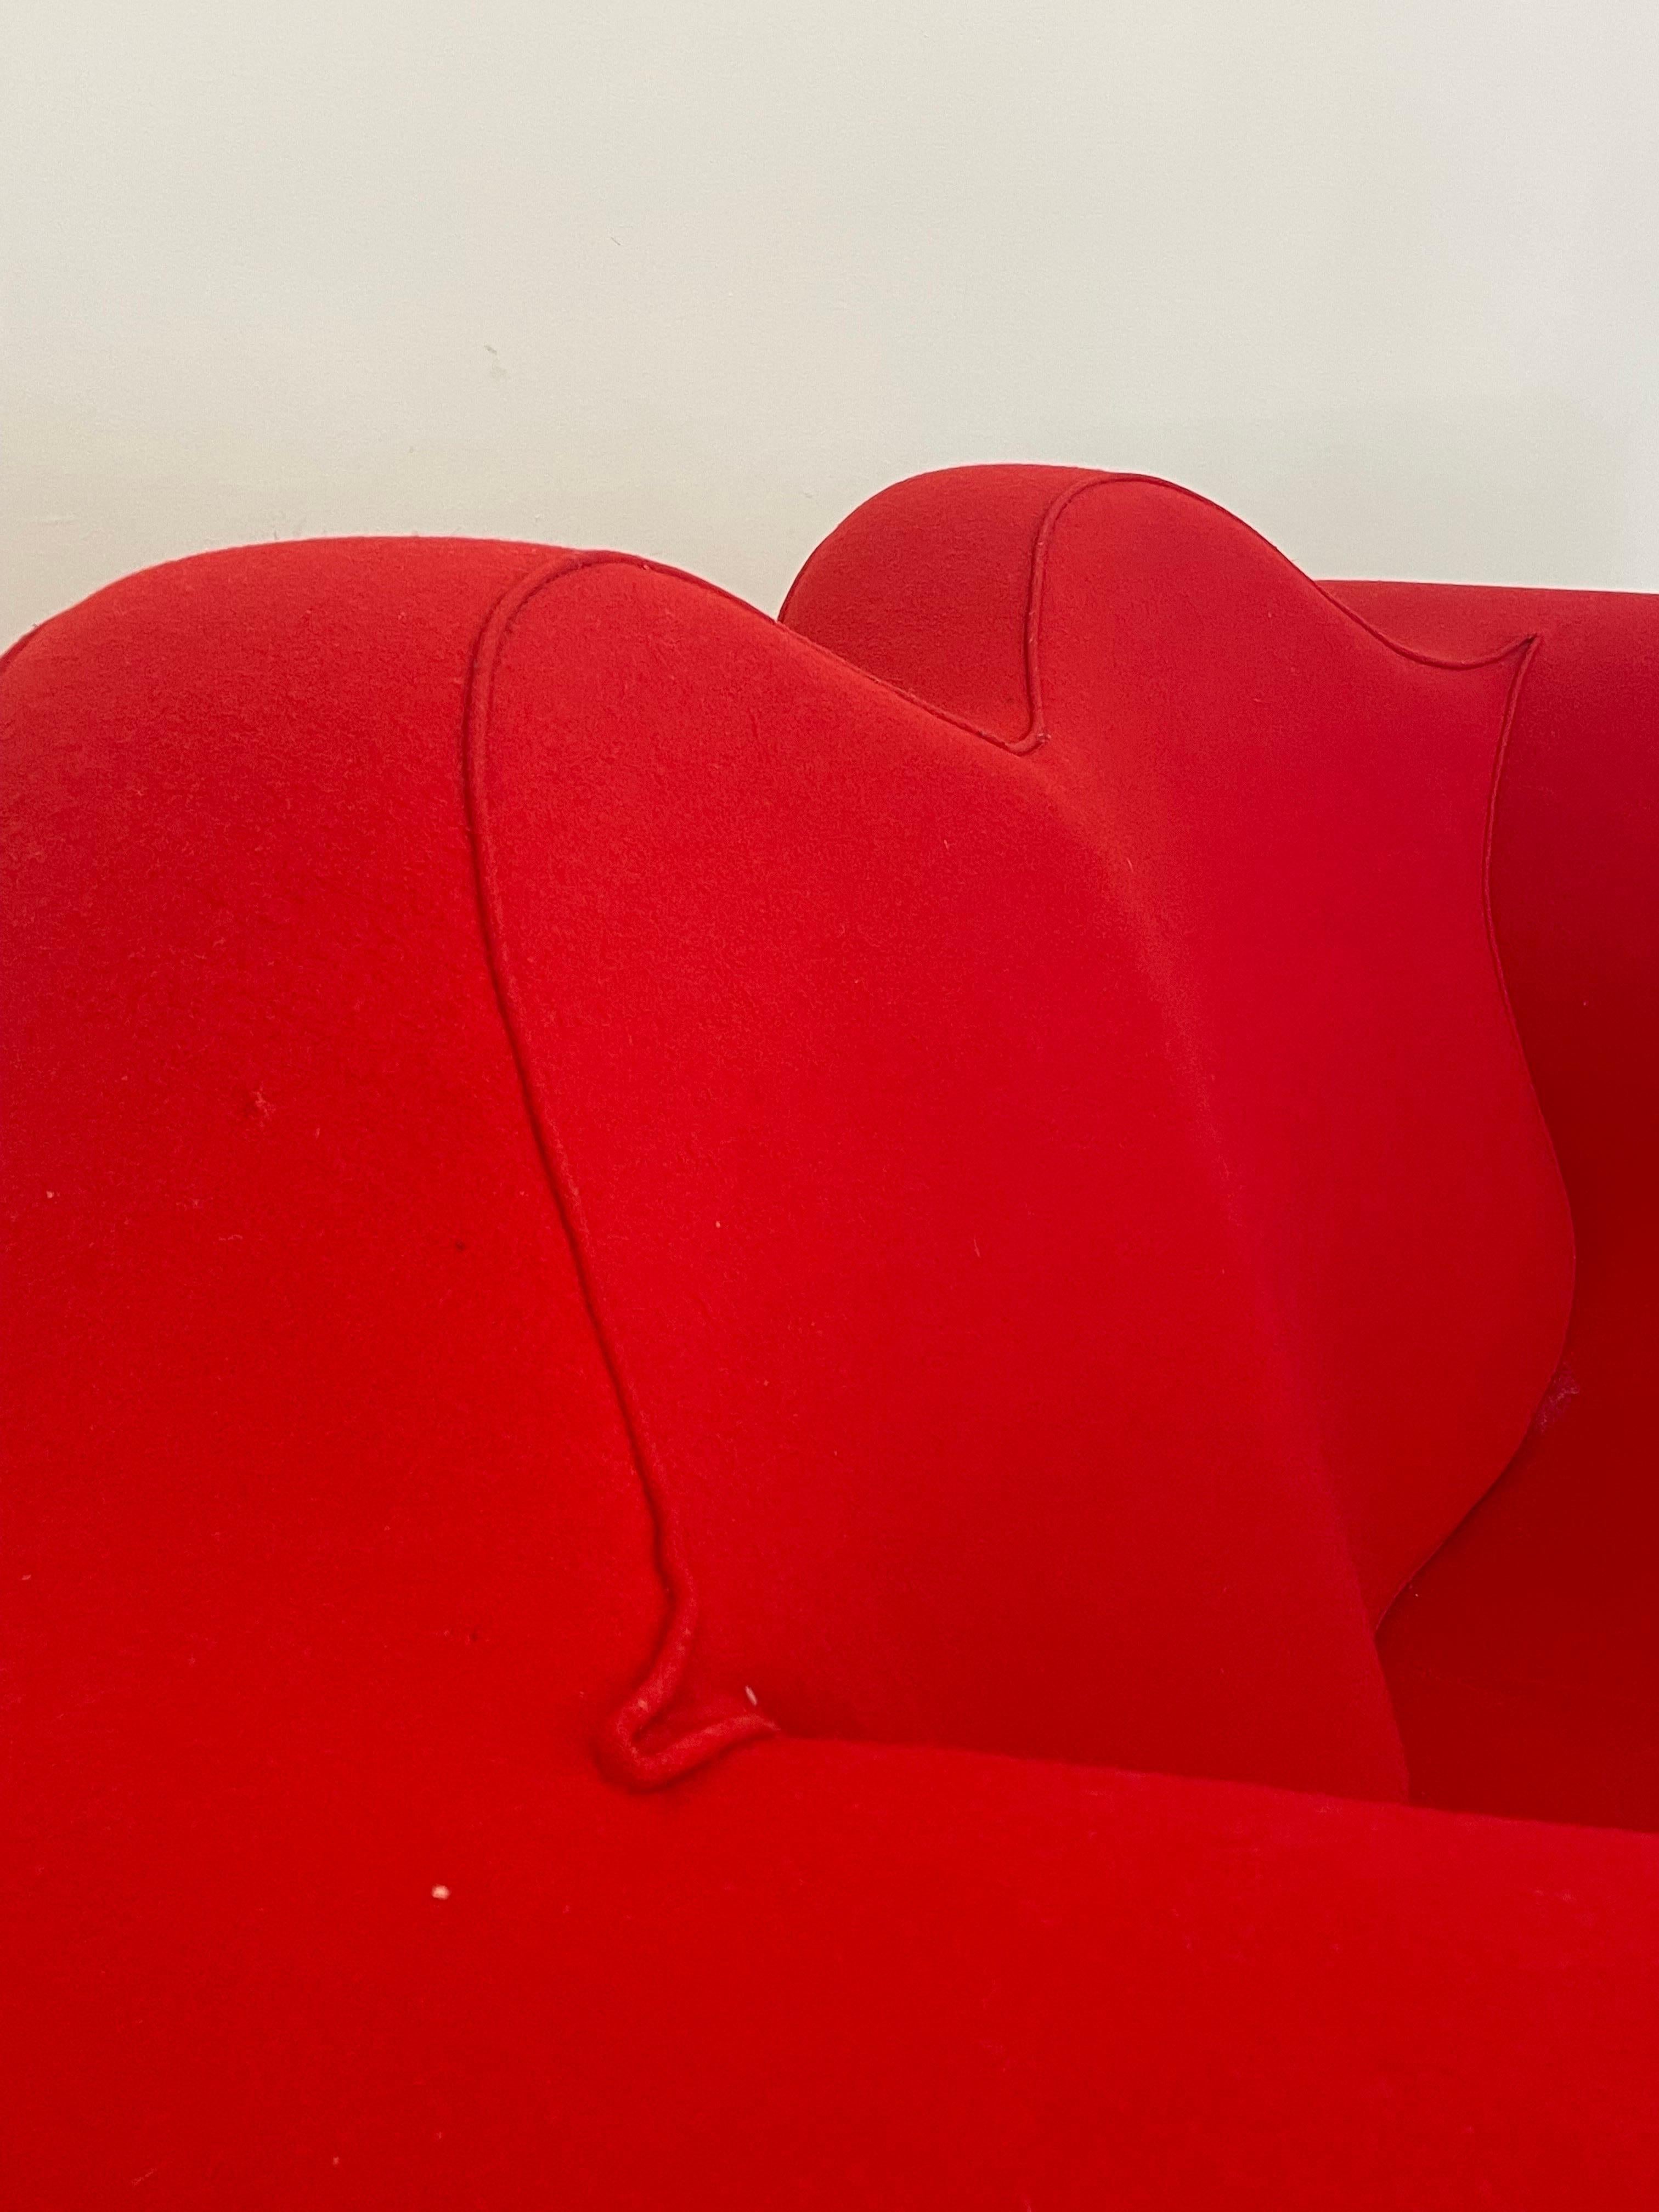 Double Soft Big Easy Sofa by Ron Arad, 1991 Moroso, Italy For Sale 2